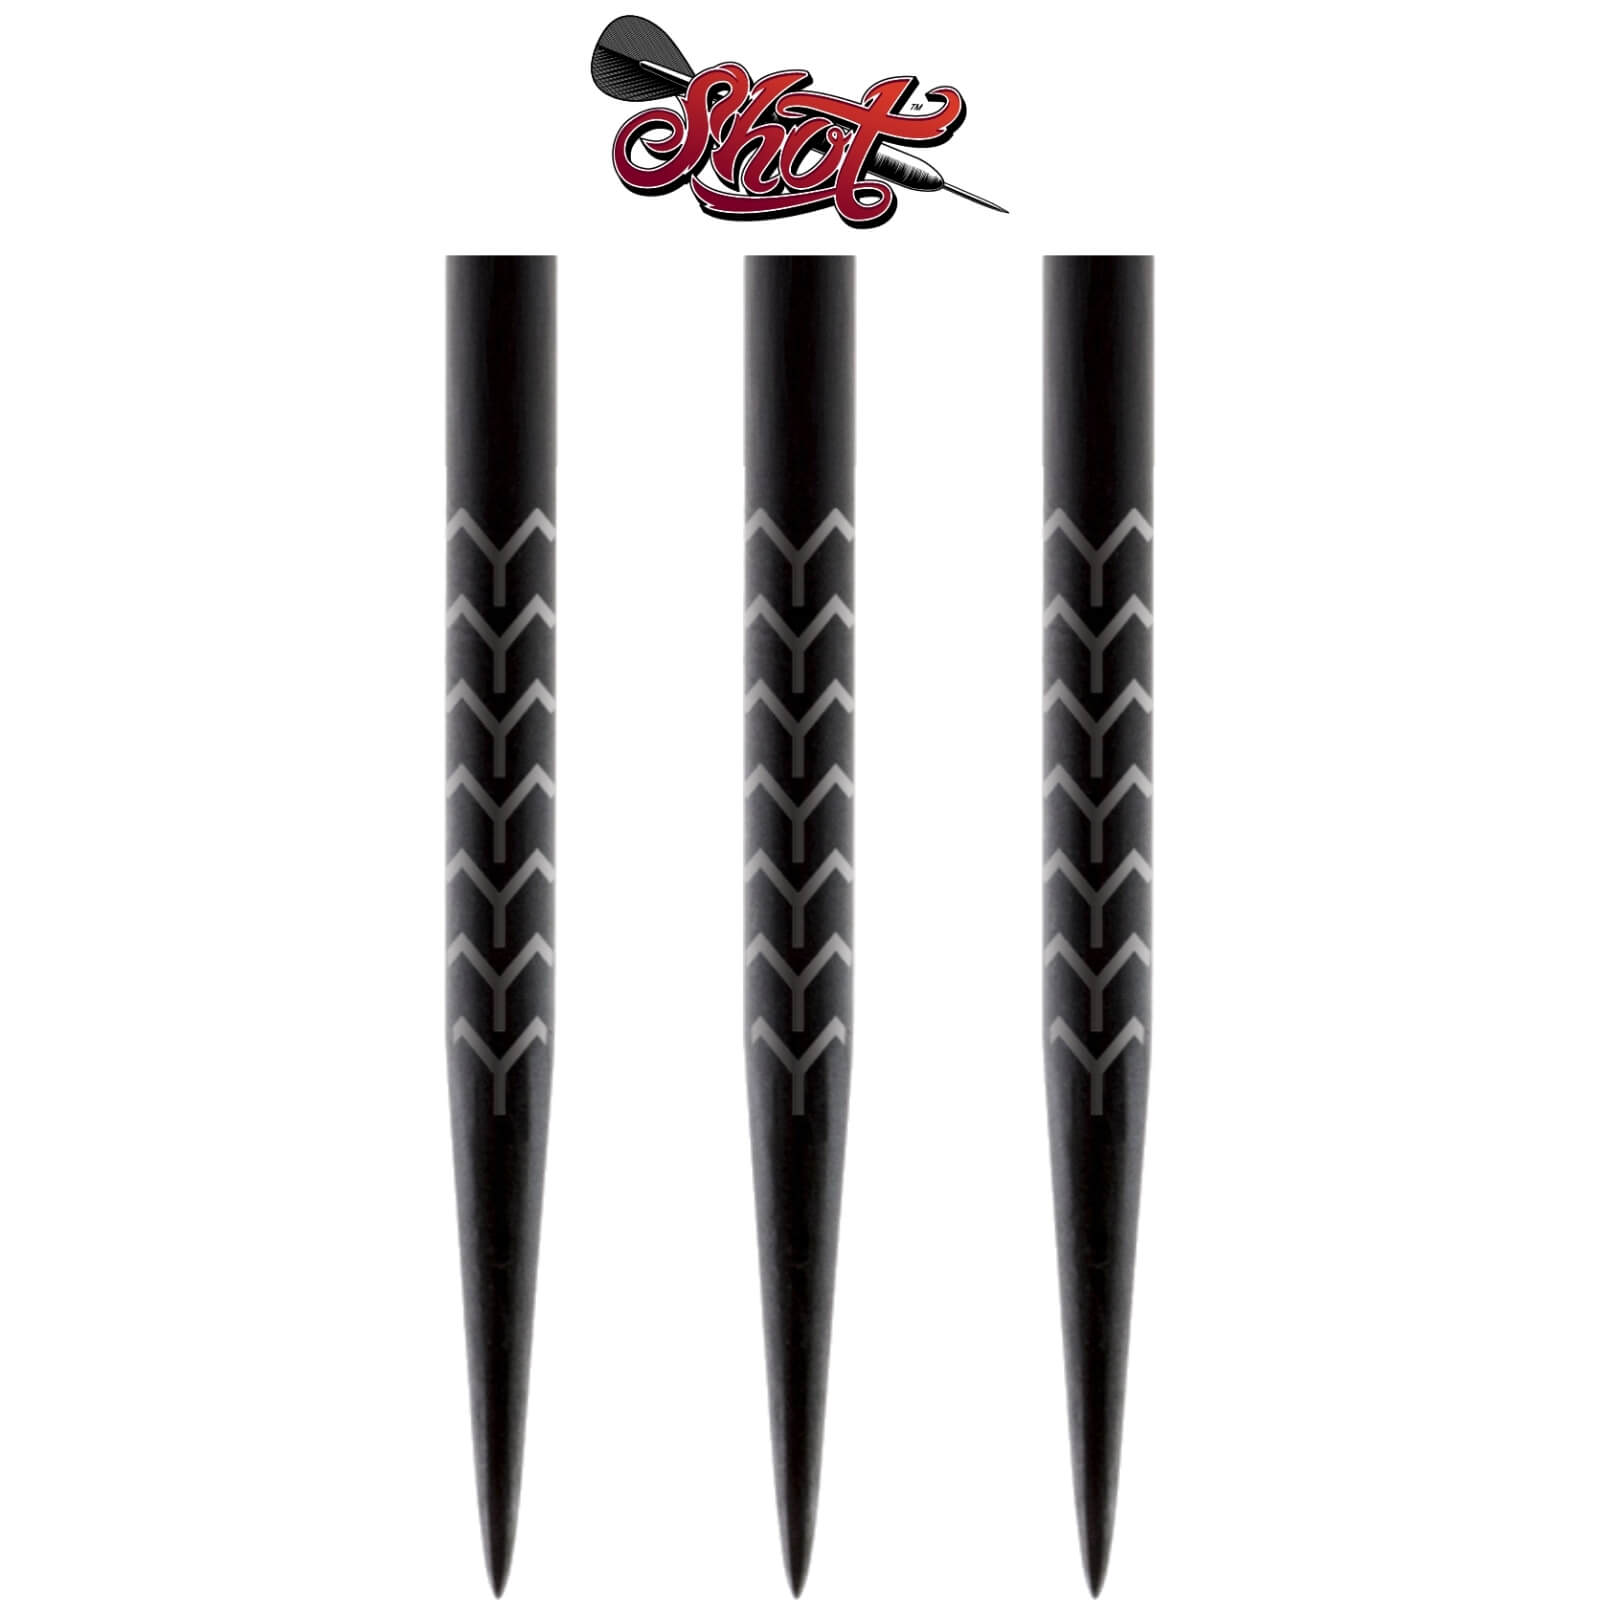 Point Accessories - Shot - Tribal Weapon Black Ti Dart Points - 35mm 